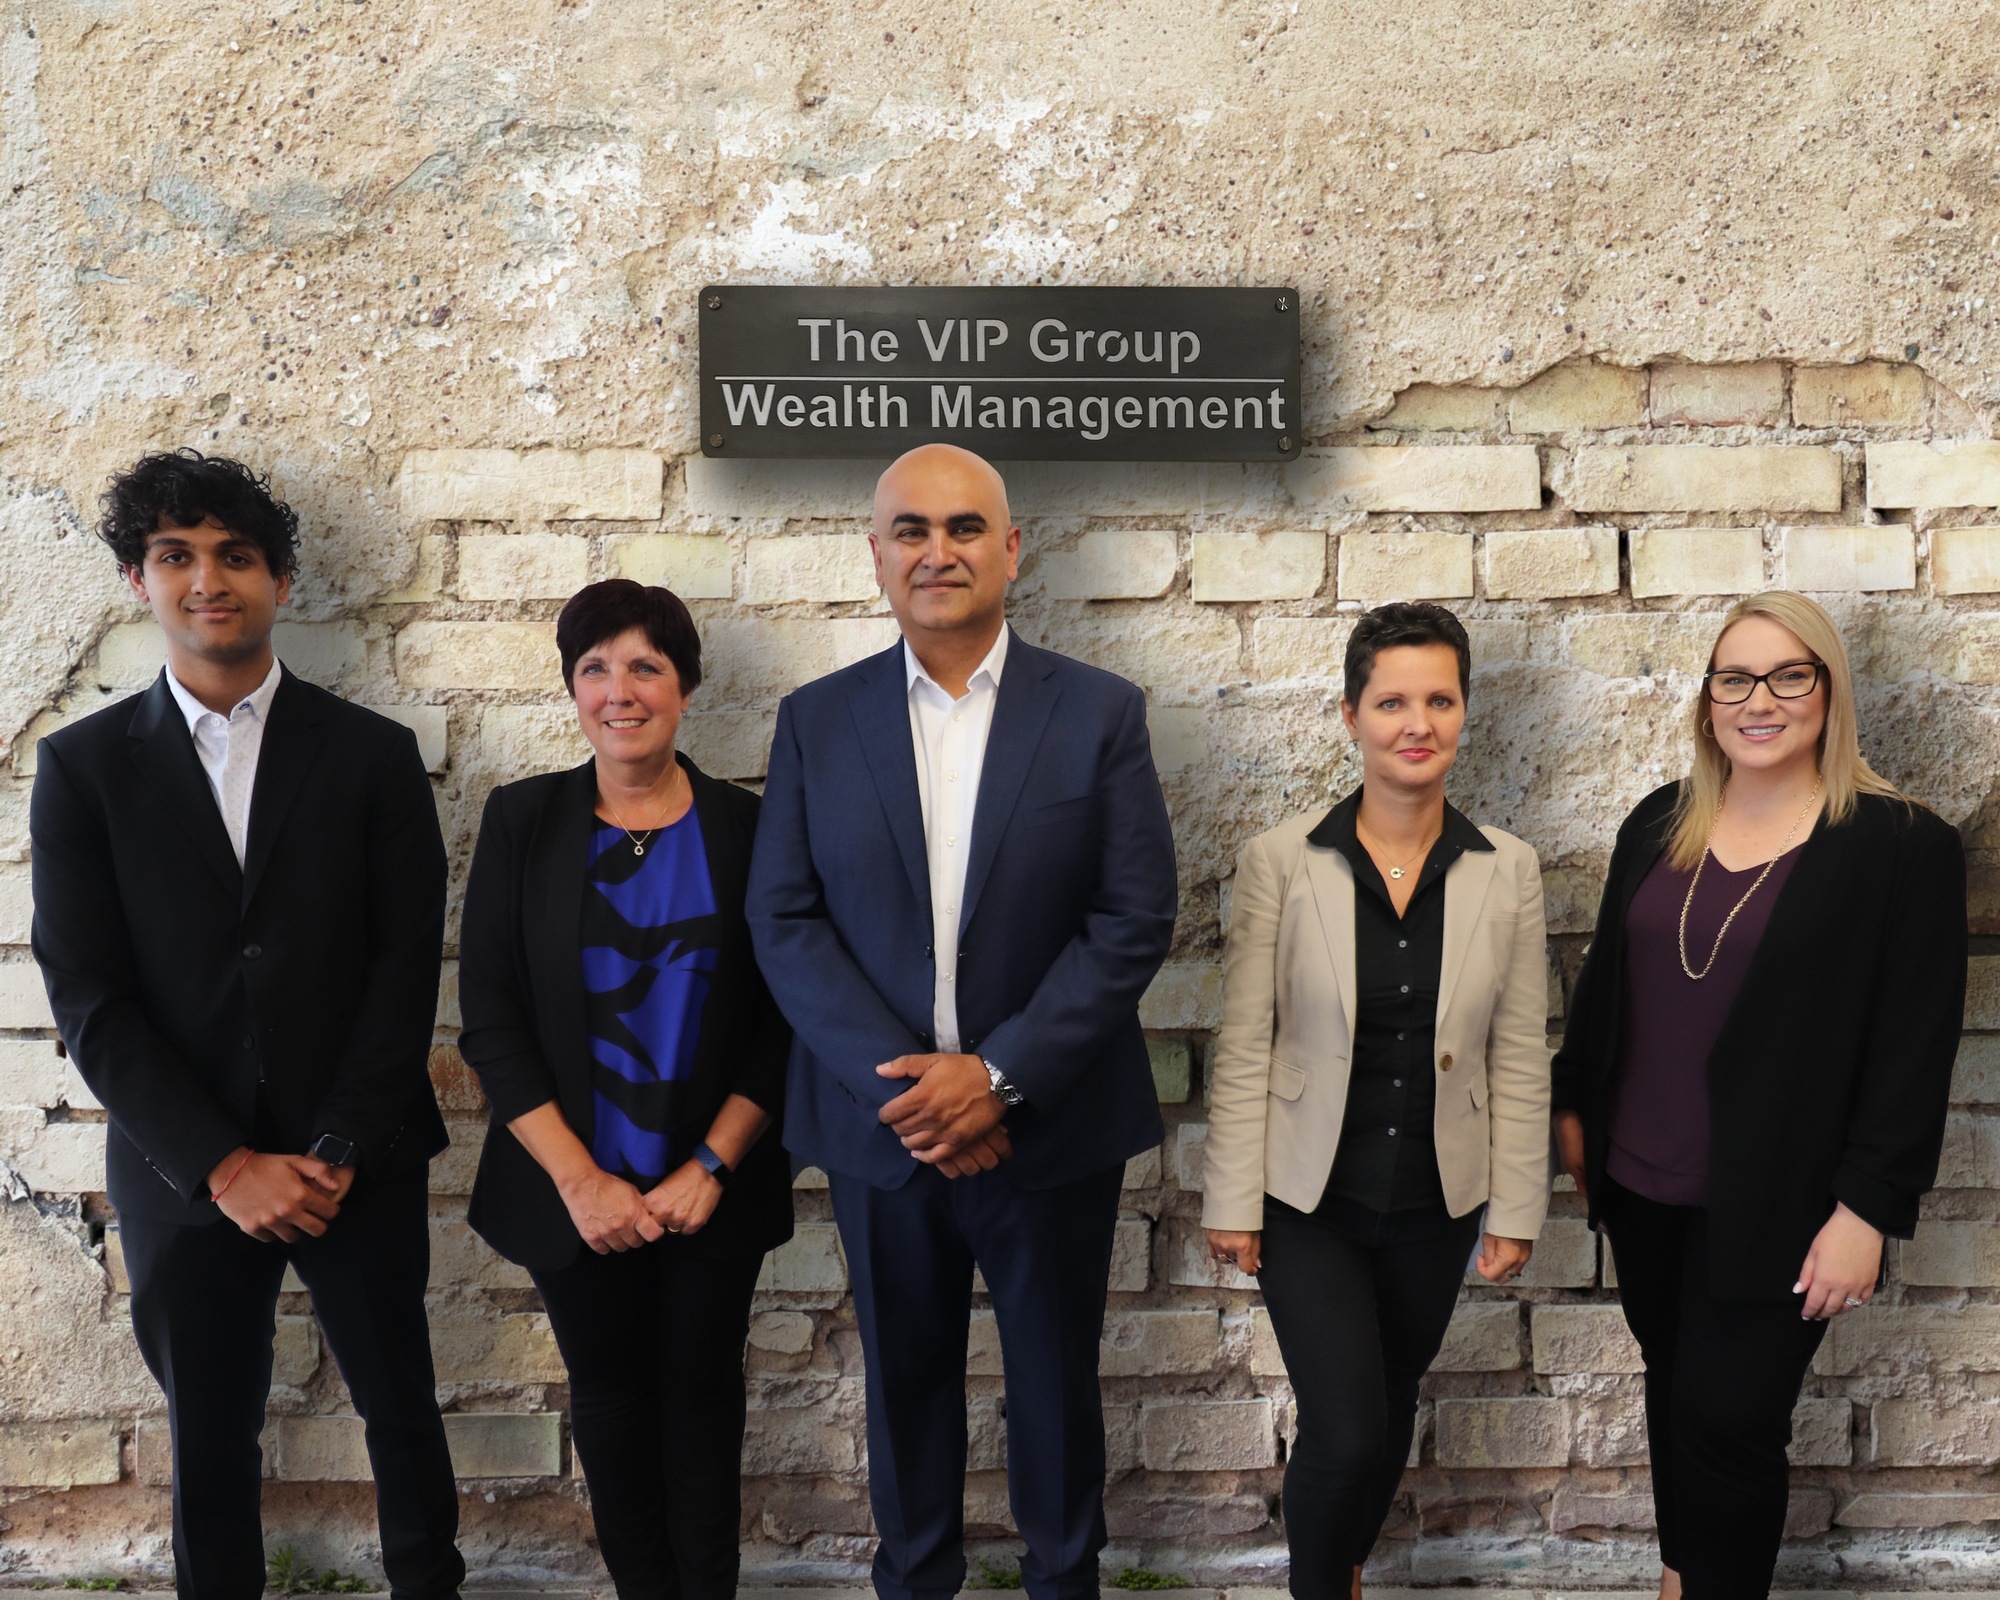 The VIP Group Wealth Management